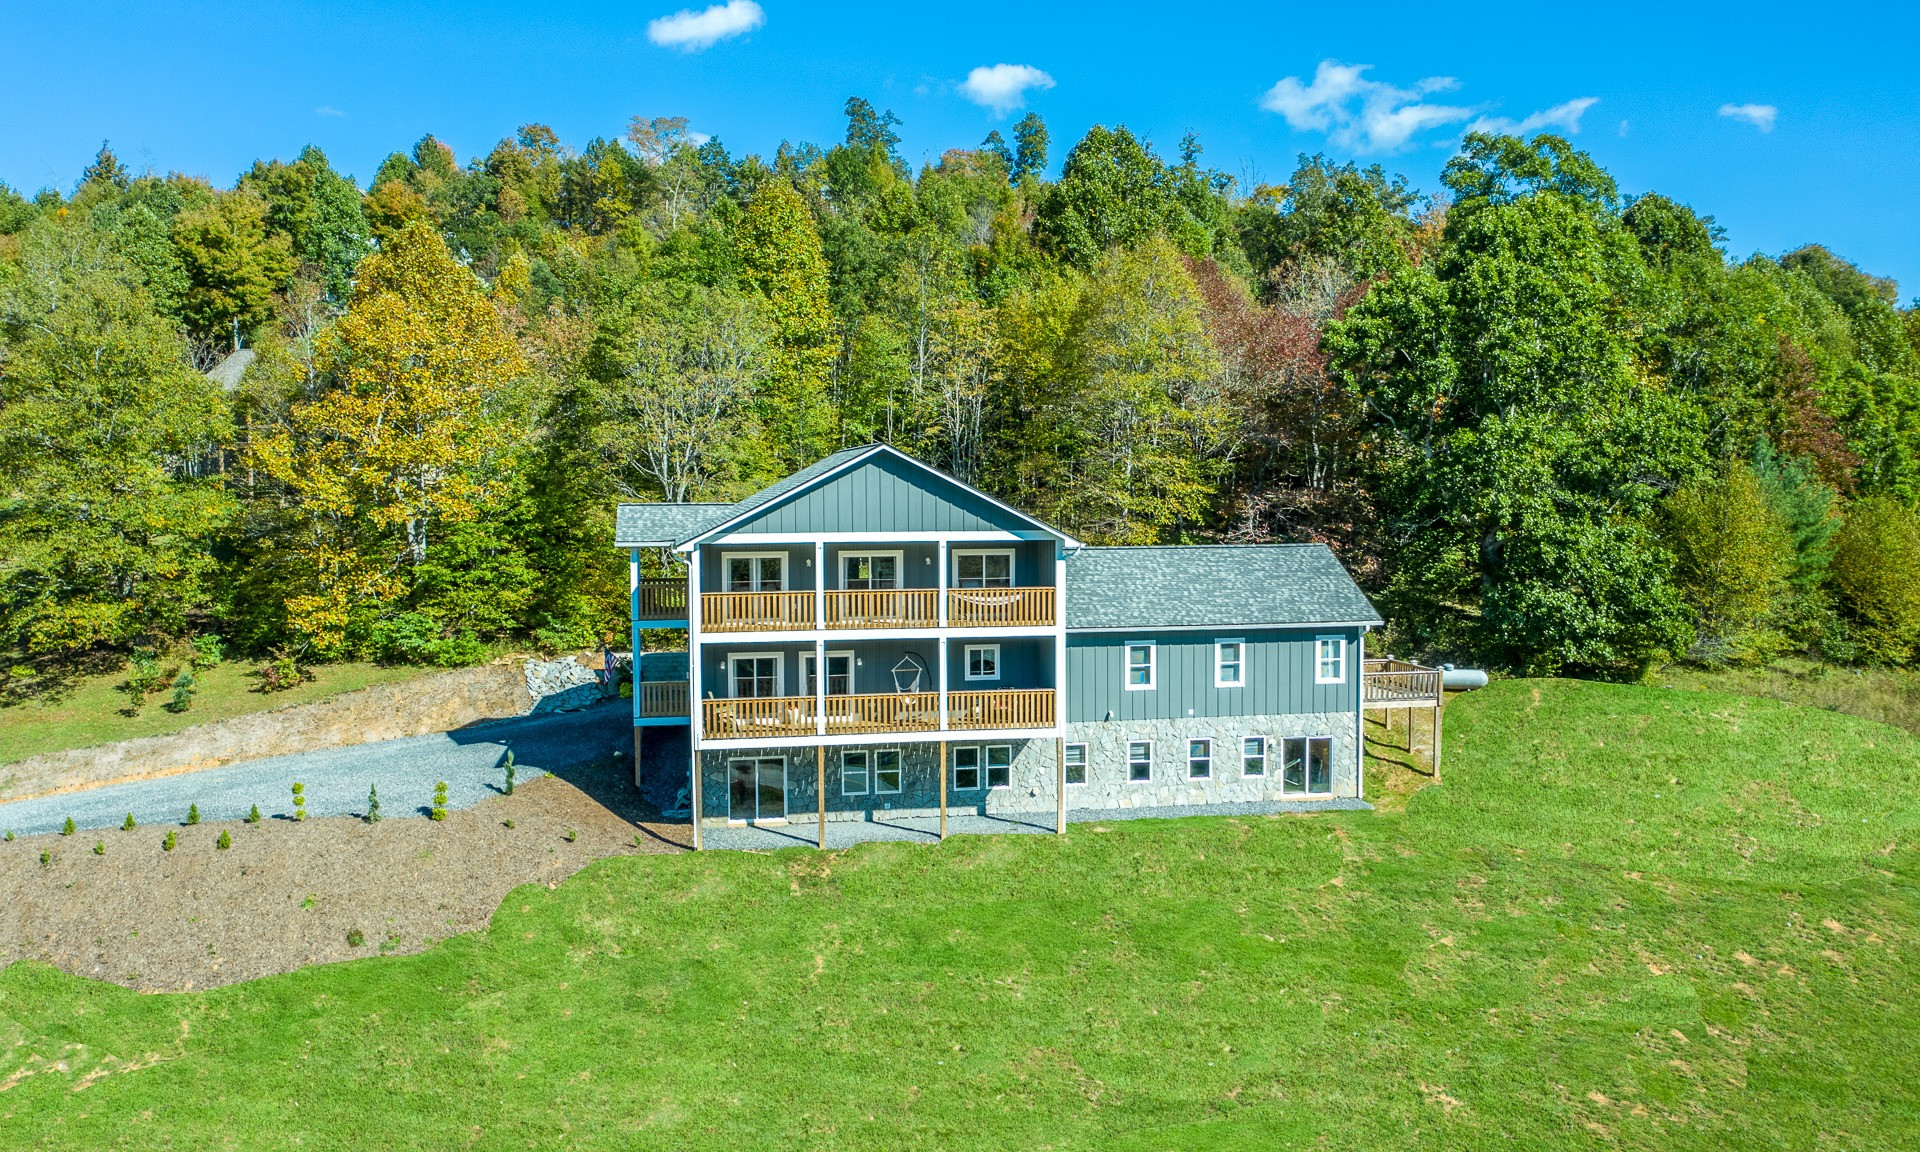 LIKE-NEW, QUALITY CRAFTSMANSHIP, VIEW & GREAT SOUTHERN ASHE COUNTY LOCATION! This family-size home in Todd is only a year old and looks & feels brand new.